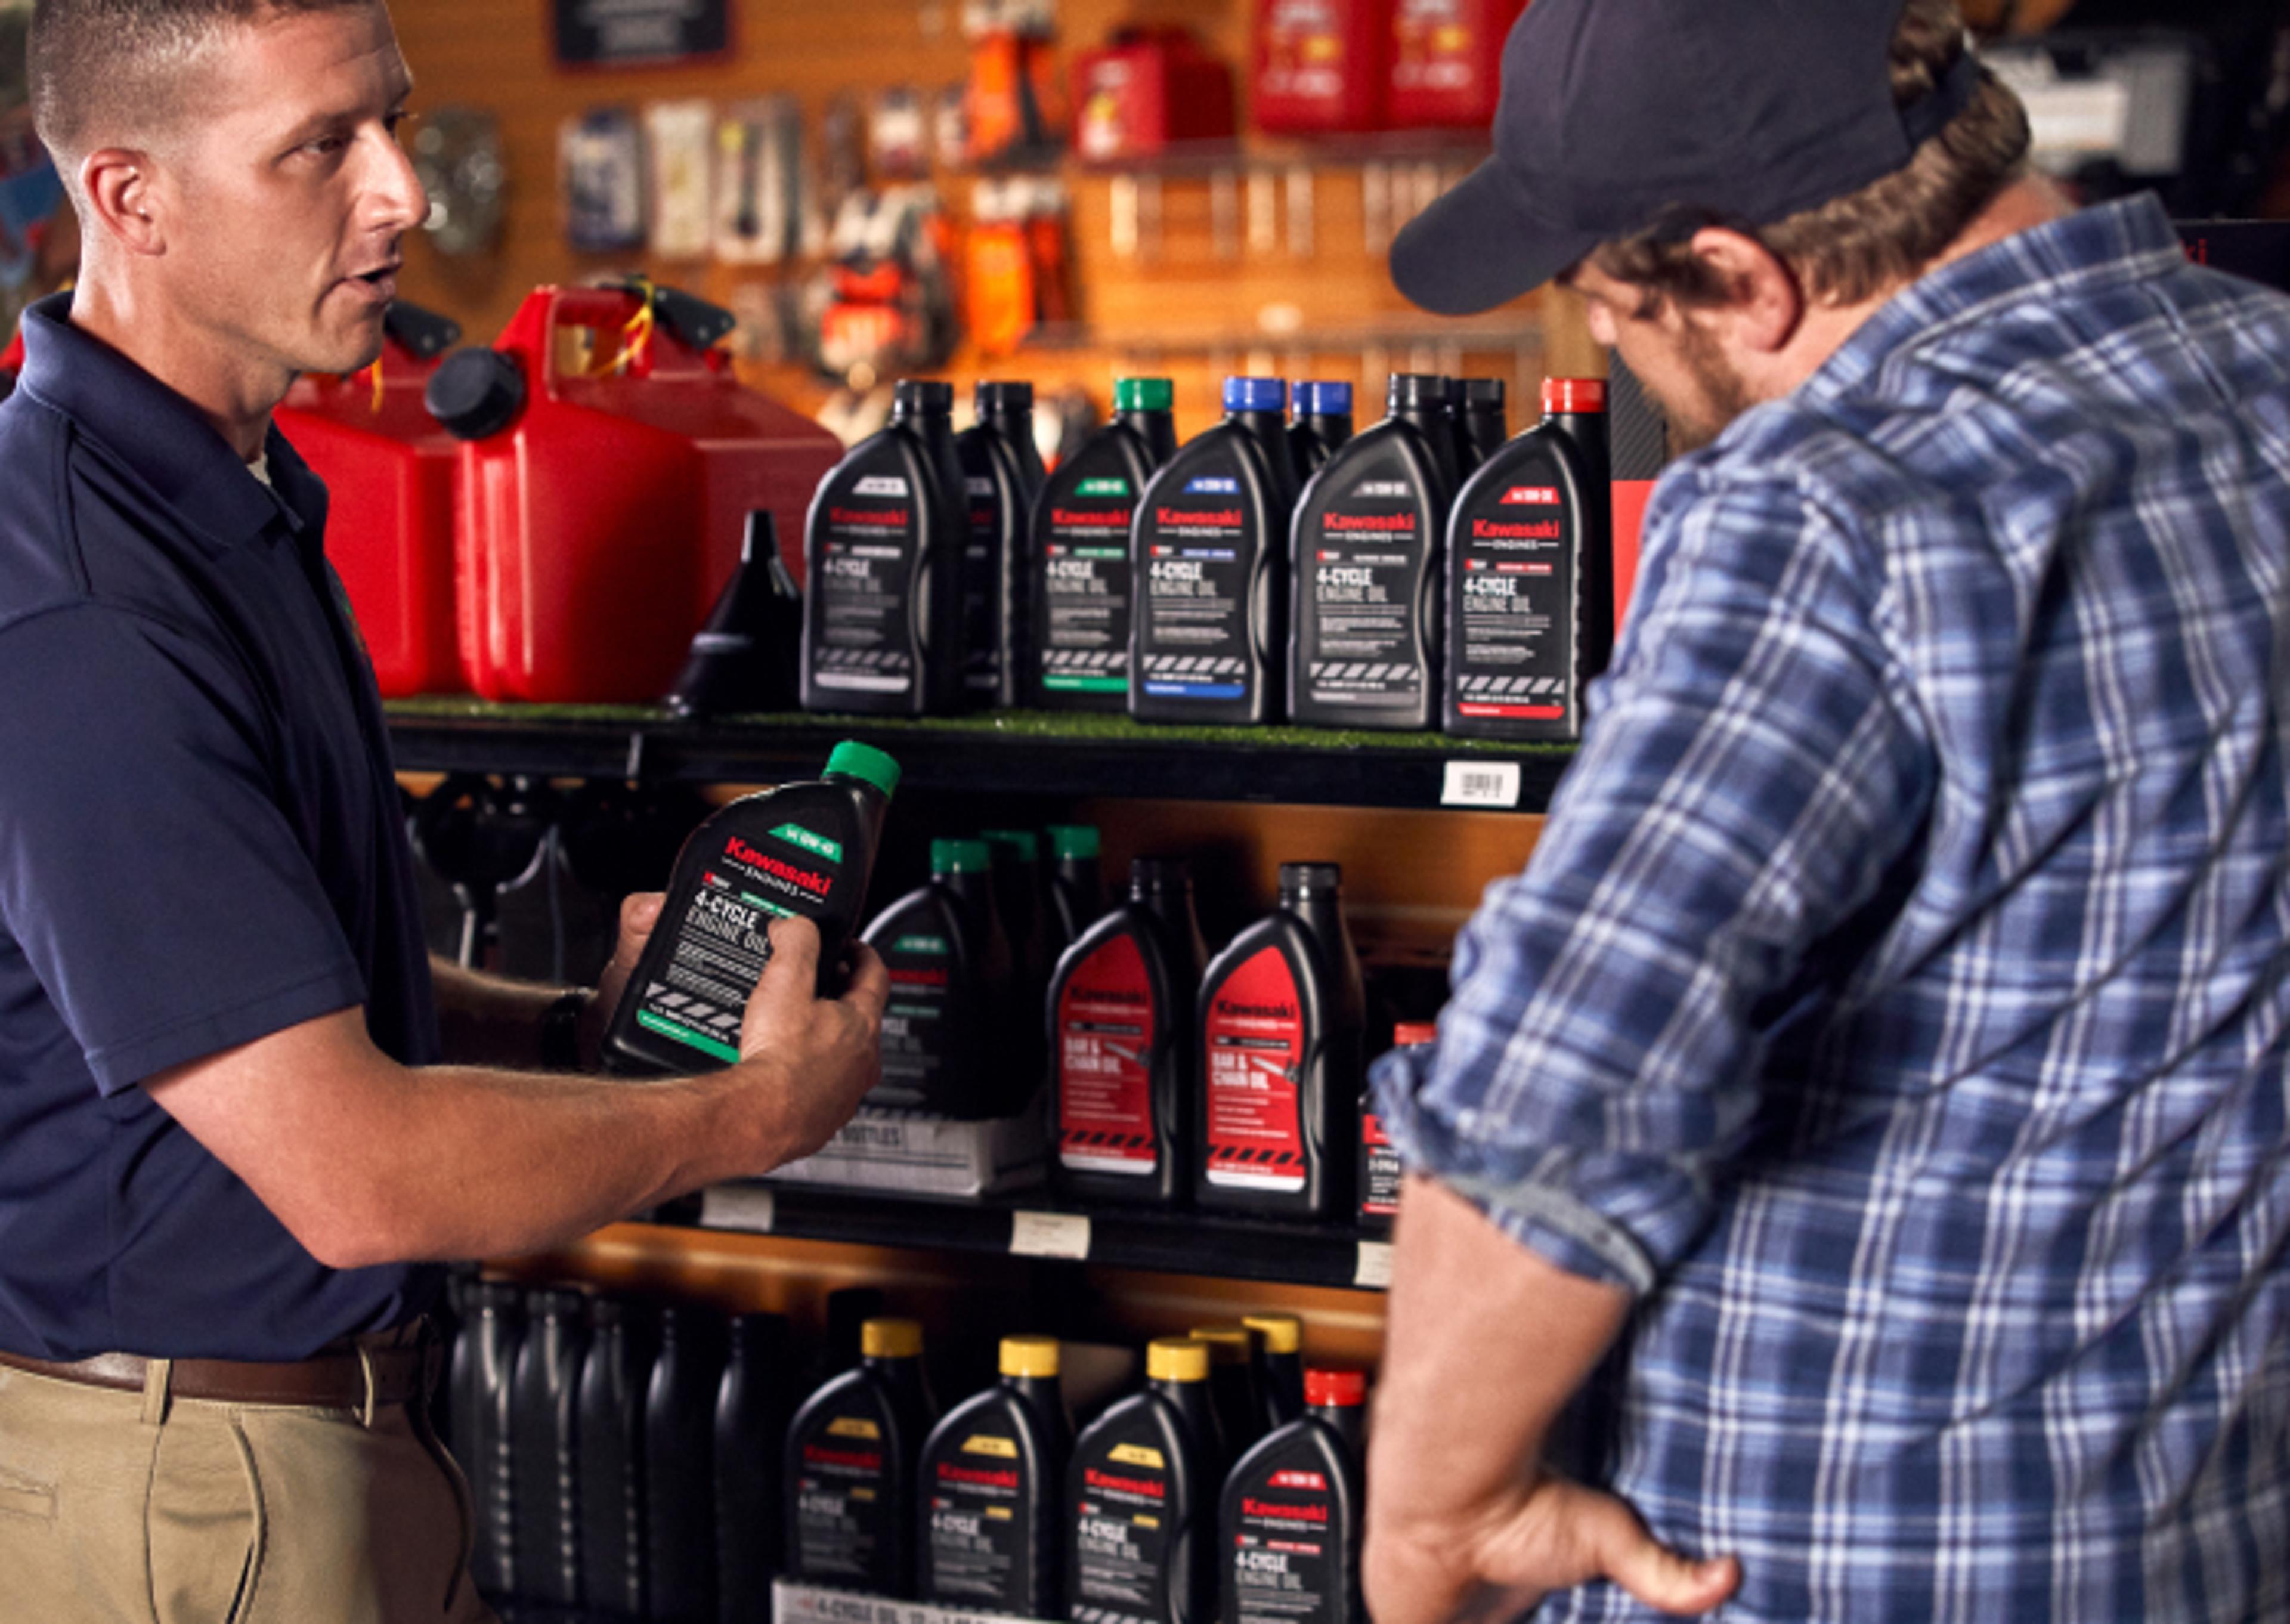 Salesperson and customer discussing Kawasaki engine oil.